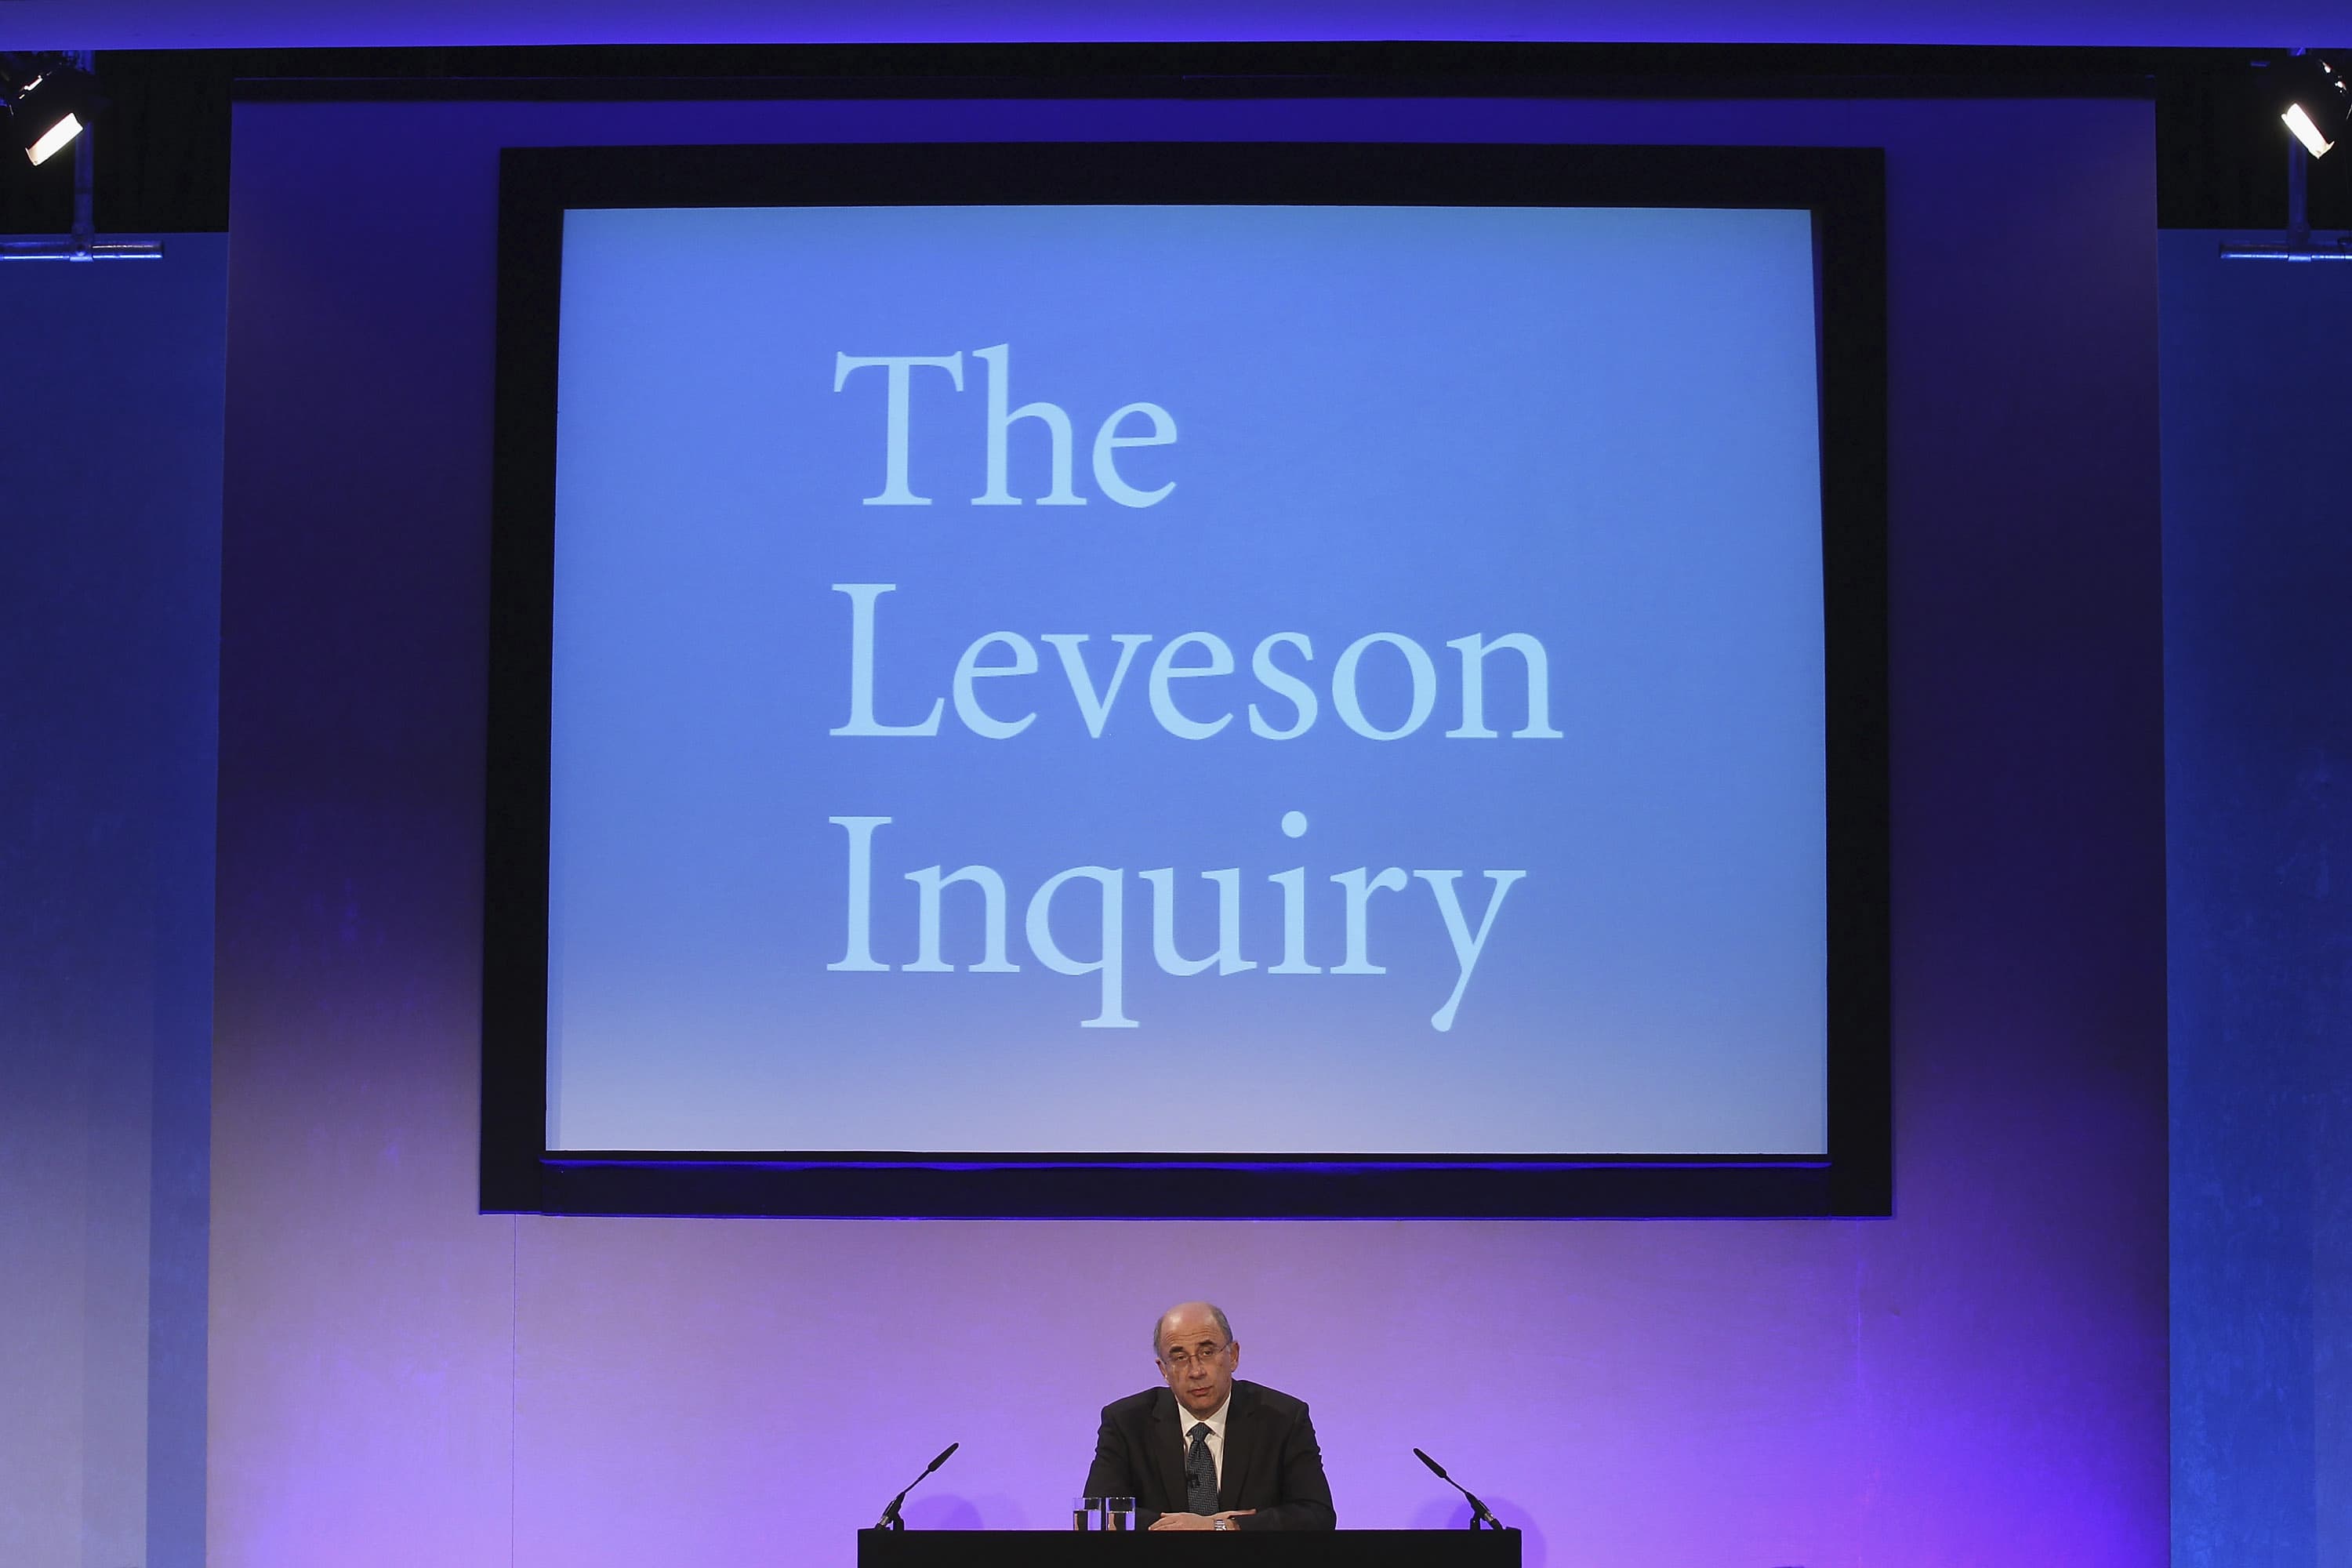 Lord Justice Leveson unveils his report in London on 29 November 2012 following an inquiry into U.K. media practices, REUTERS